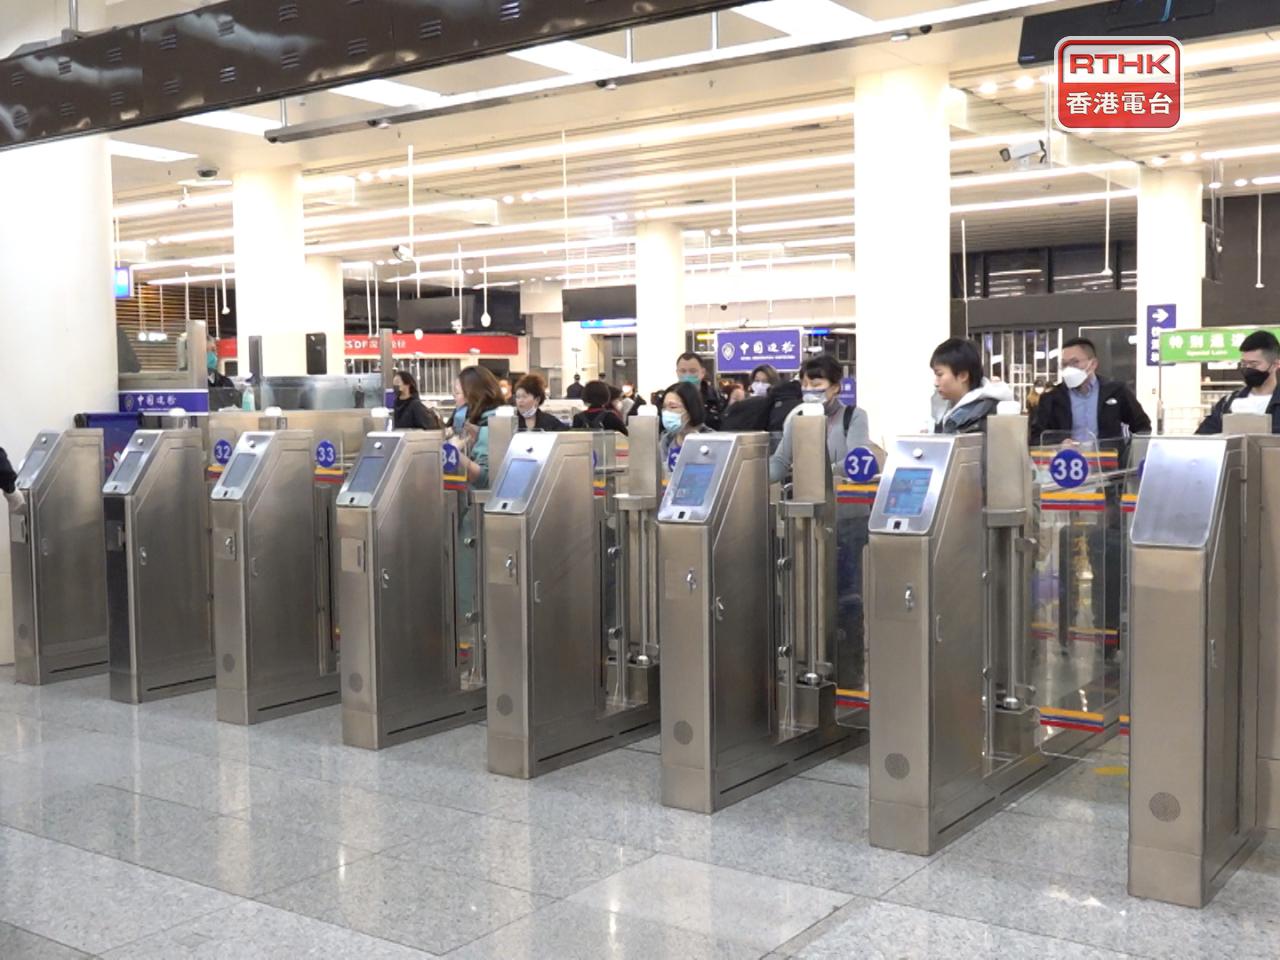 Non-Chinese HK residents to get mainland travel cards